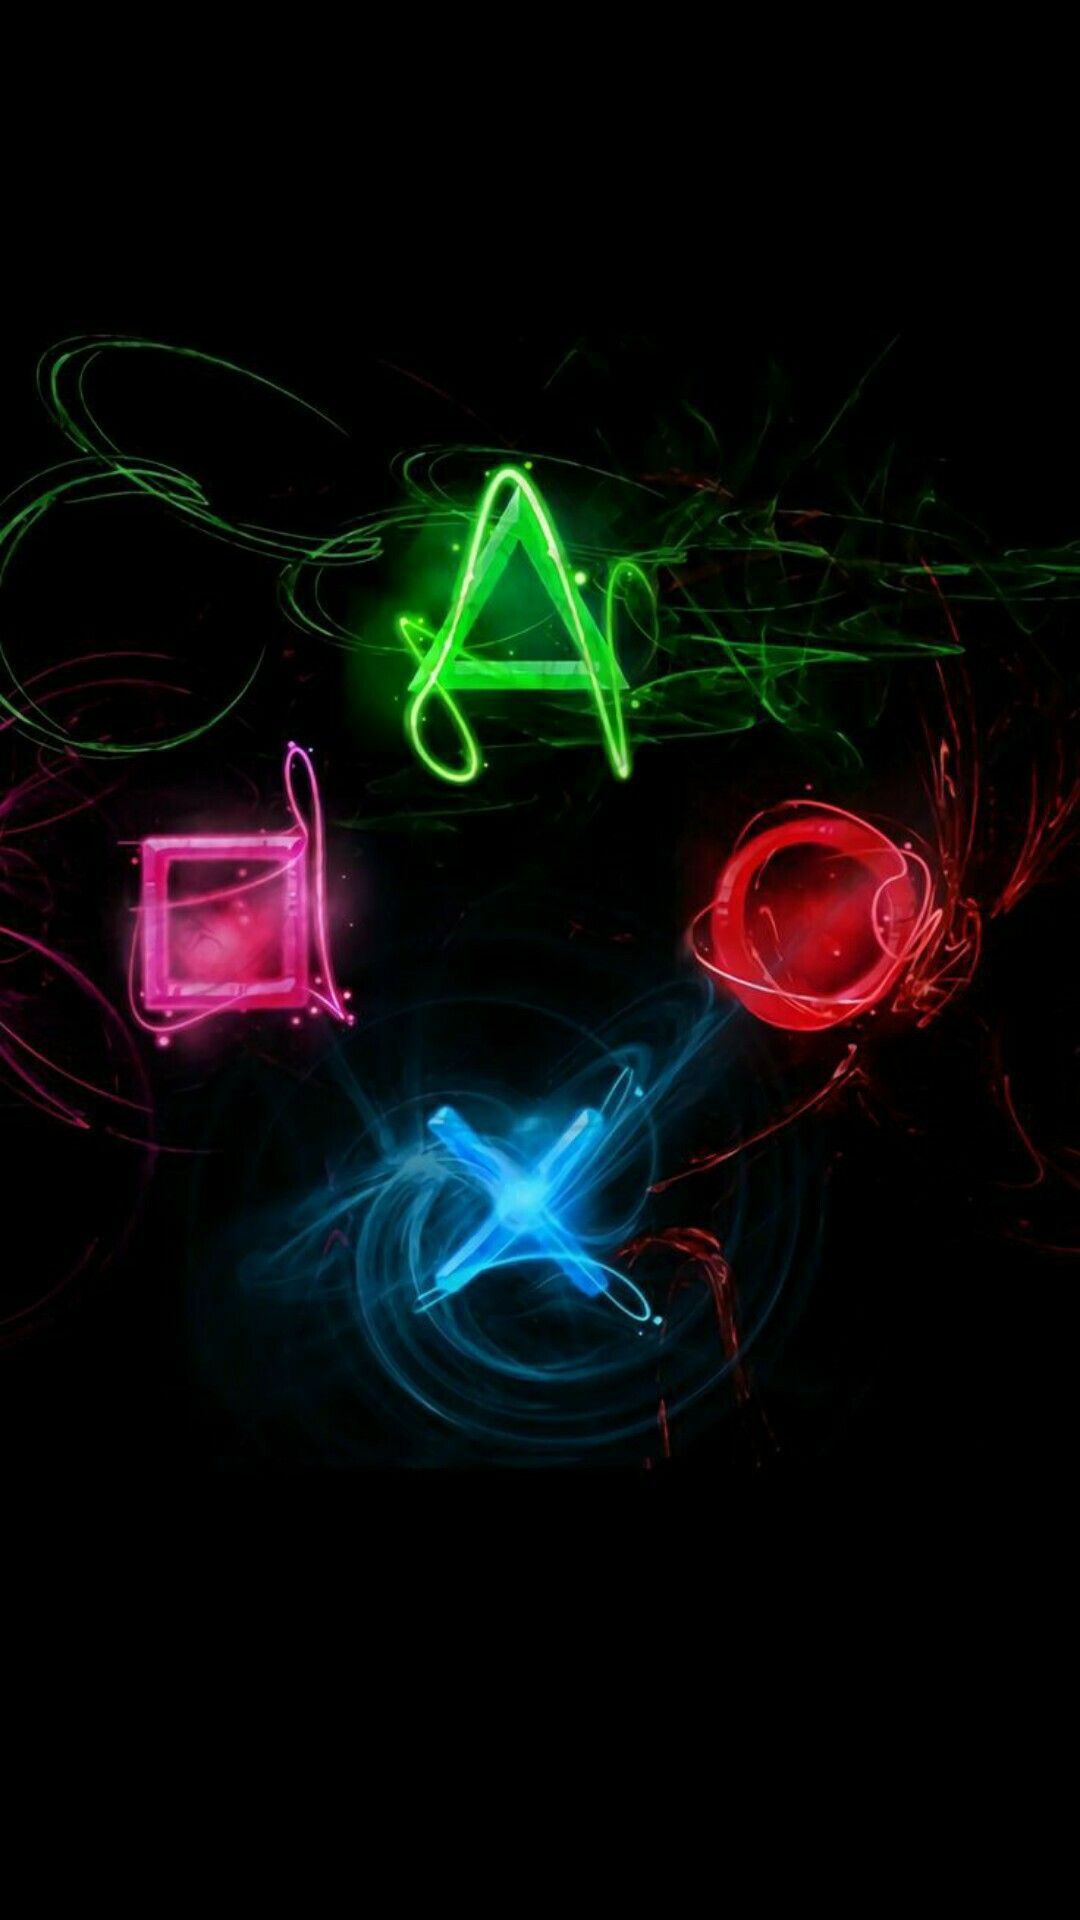 gaming wallpaper iphone,light,neon,text,graphic design,font